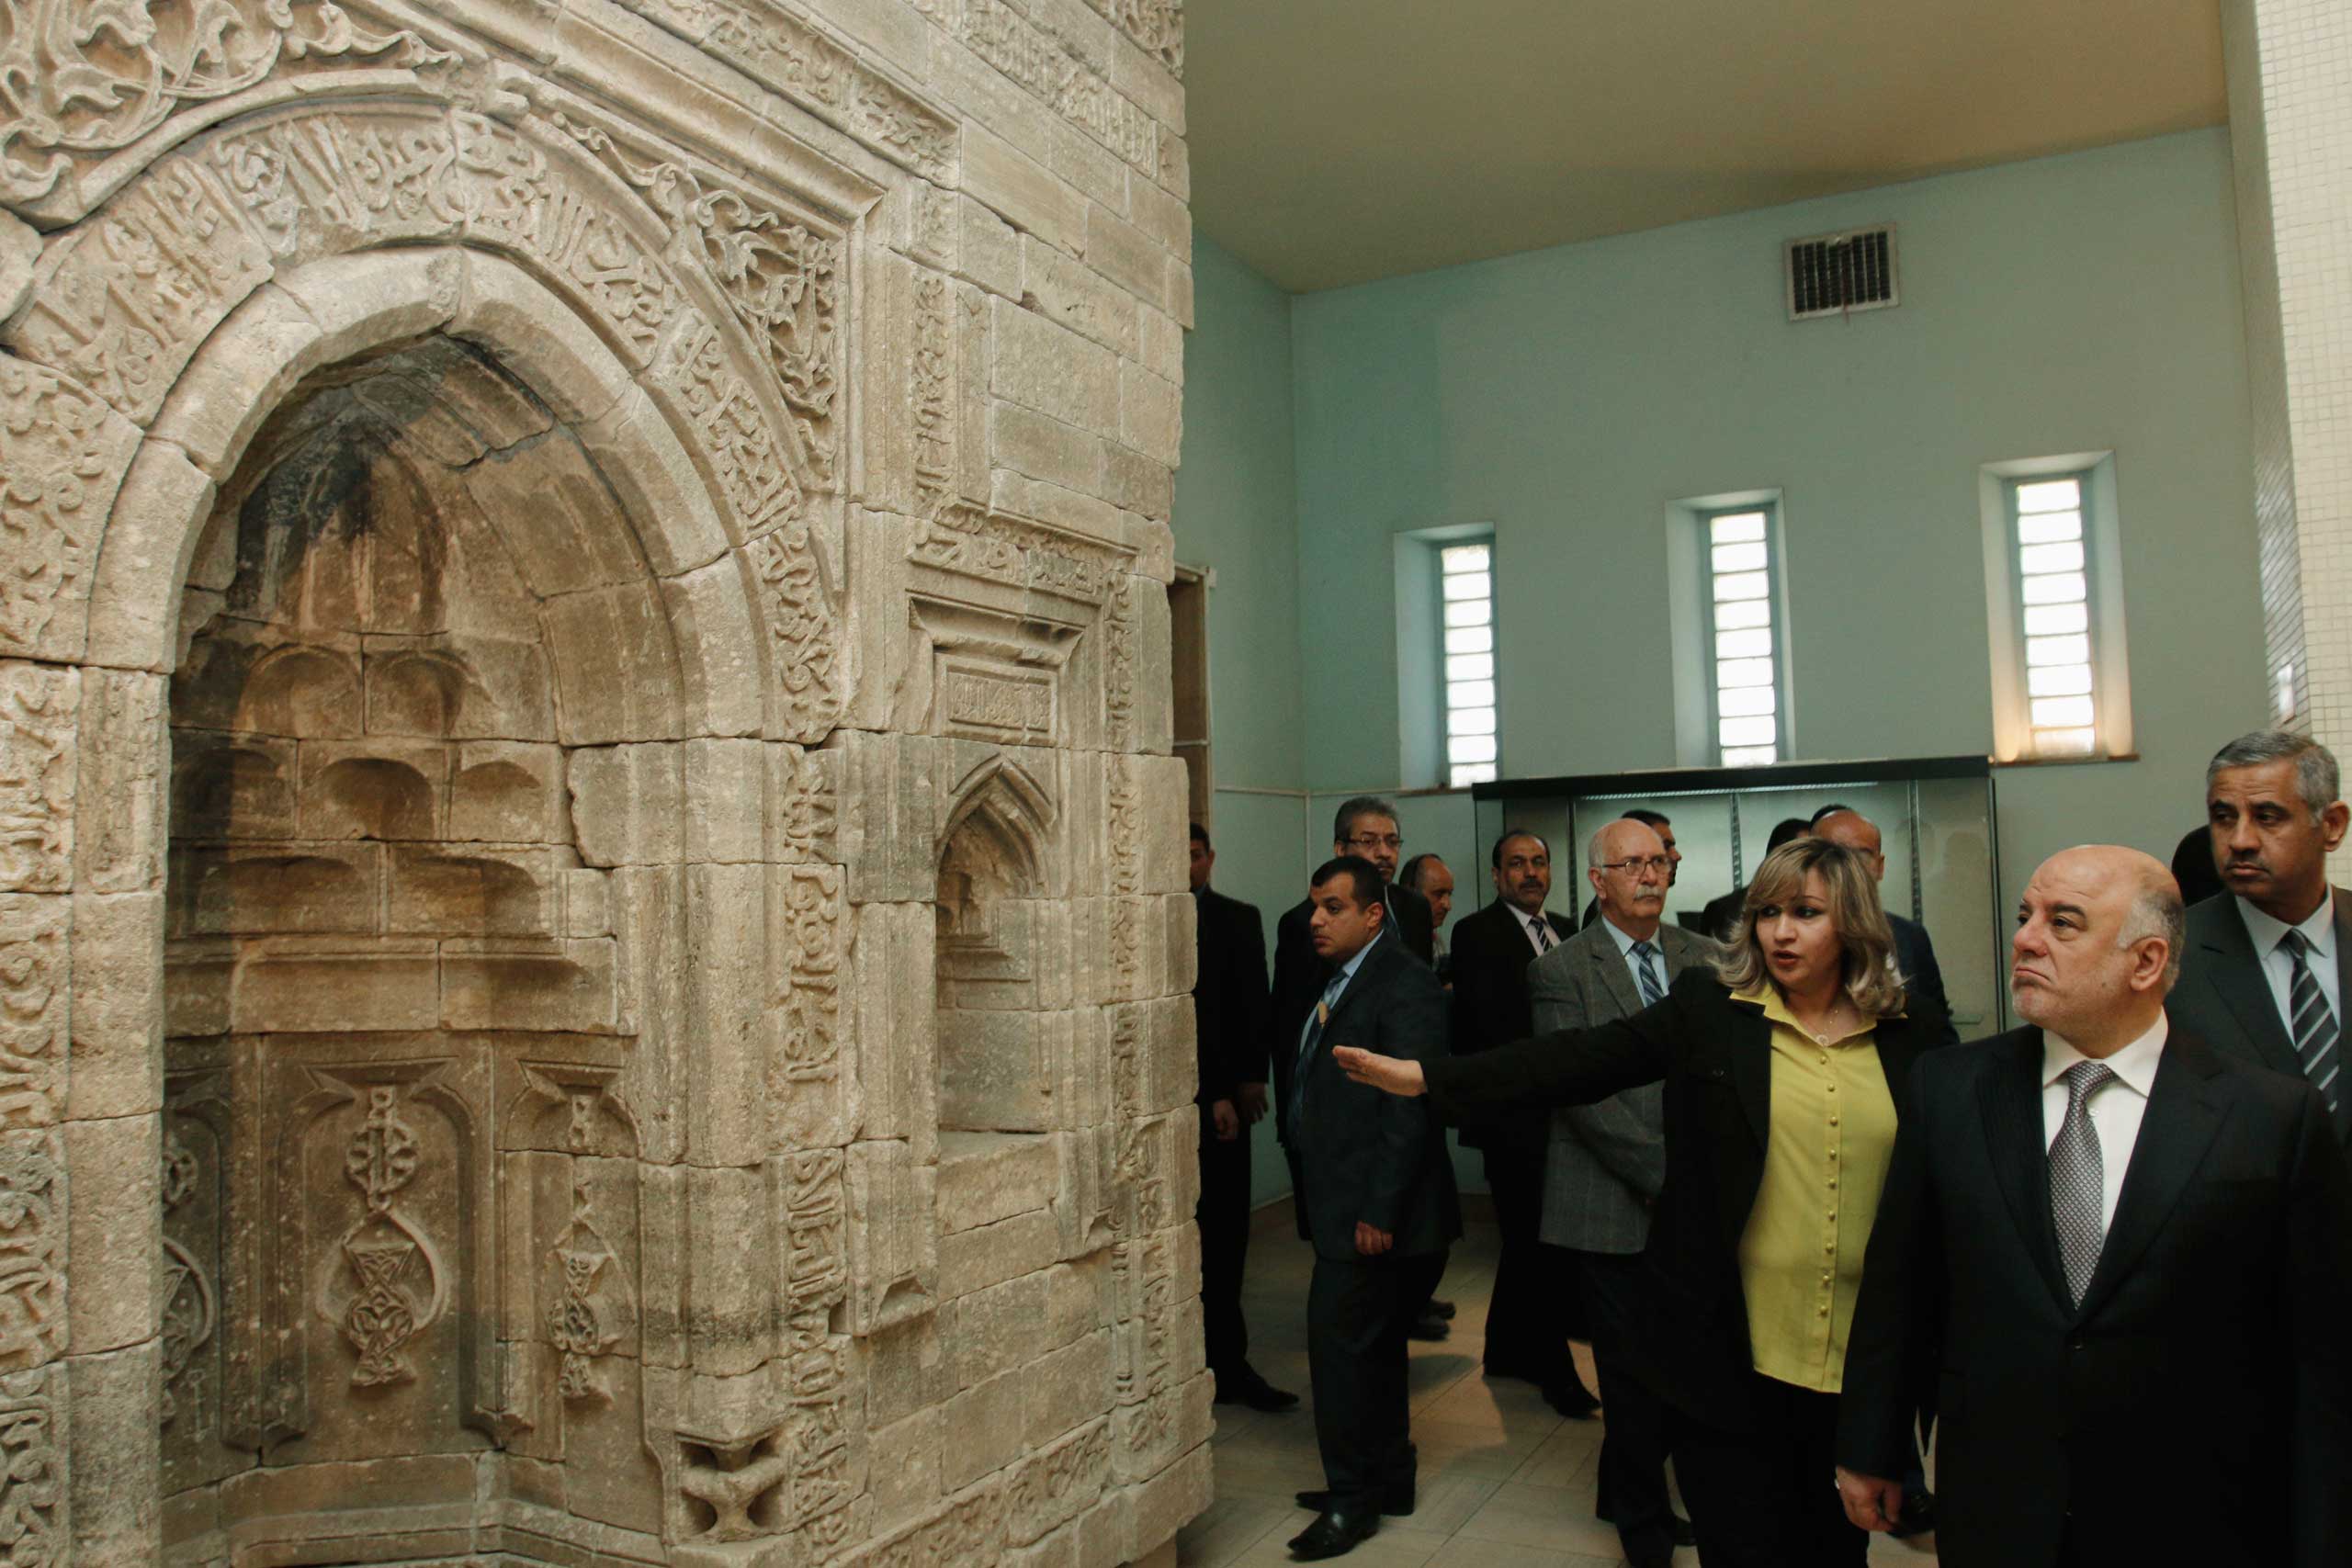 Iraqi Prime Minister Haider al-Abadi, right, visits the Iraqi National Museum in Baghdad Feb. 28, 2015. (Reuters)